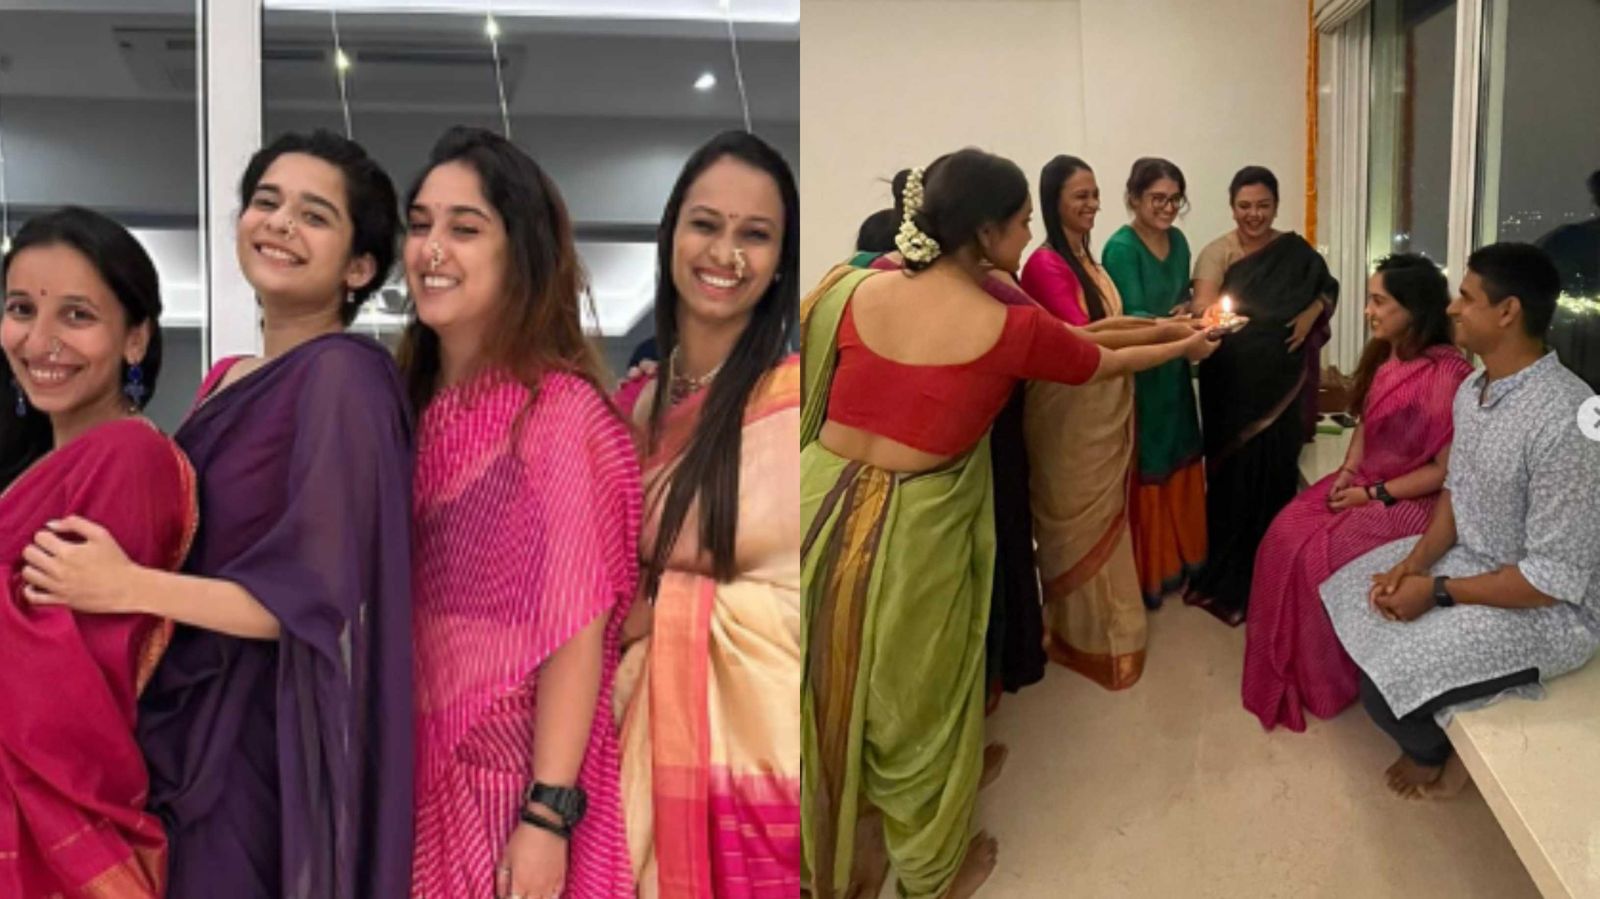 Aamir Khan's daughter Ira Khan tries speaking in Marathi at her pre-wedding ceremony, looks gorgeous in a Nath